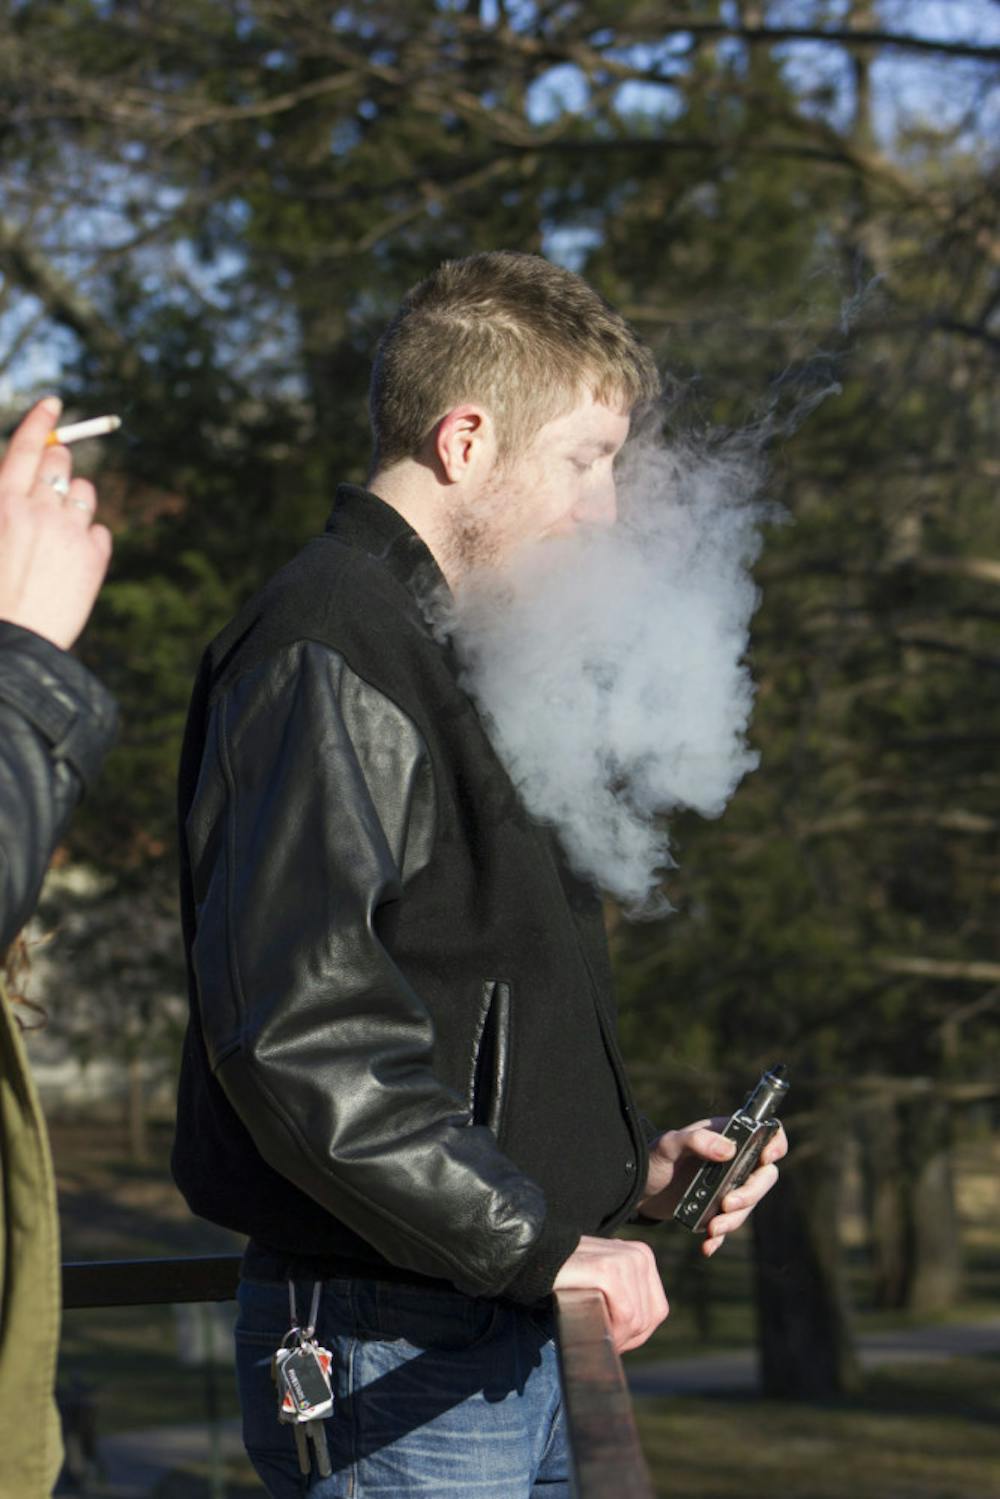 <p class="p1">Casey Speraw, computer science student, blows smoke from</p>
<p class="p1">his vaporizer near Patterson Hall on Feb. 9, 2016. In a recent</p>
<p class="p1">email to all students, the U of M alluded to cracking down on</p>
<p class="p1">smoking outside of designated areas.</p>